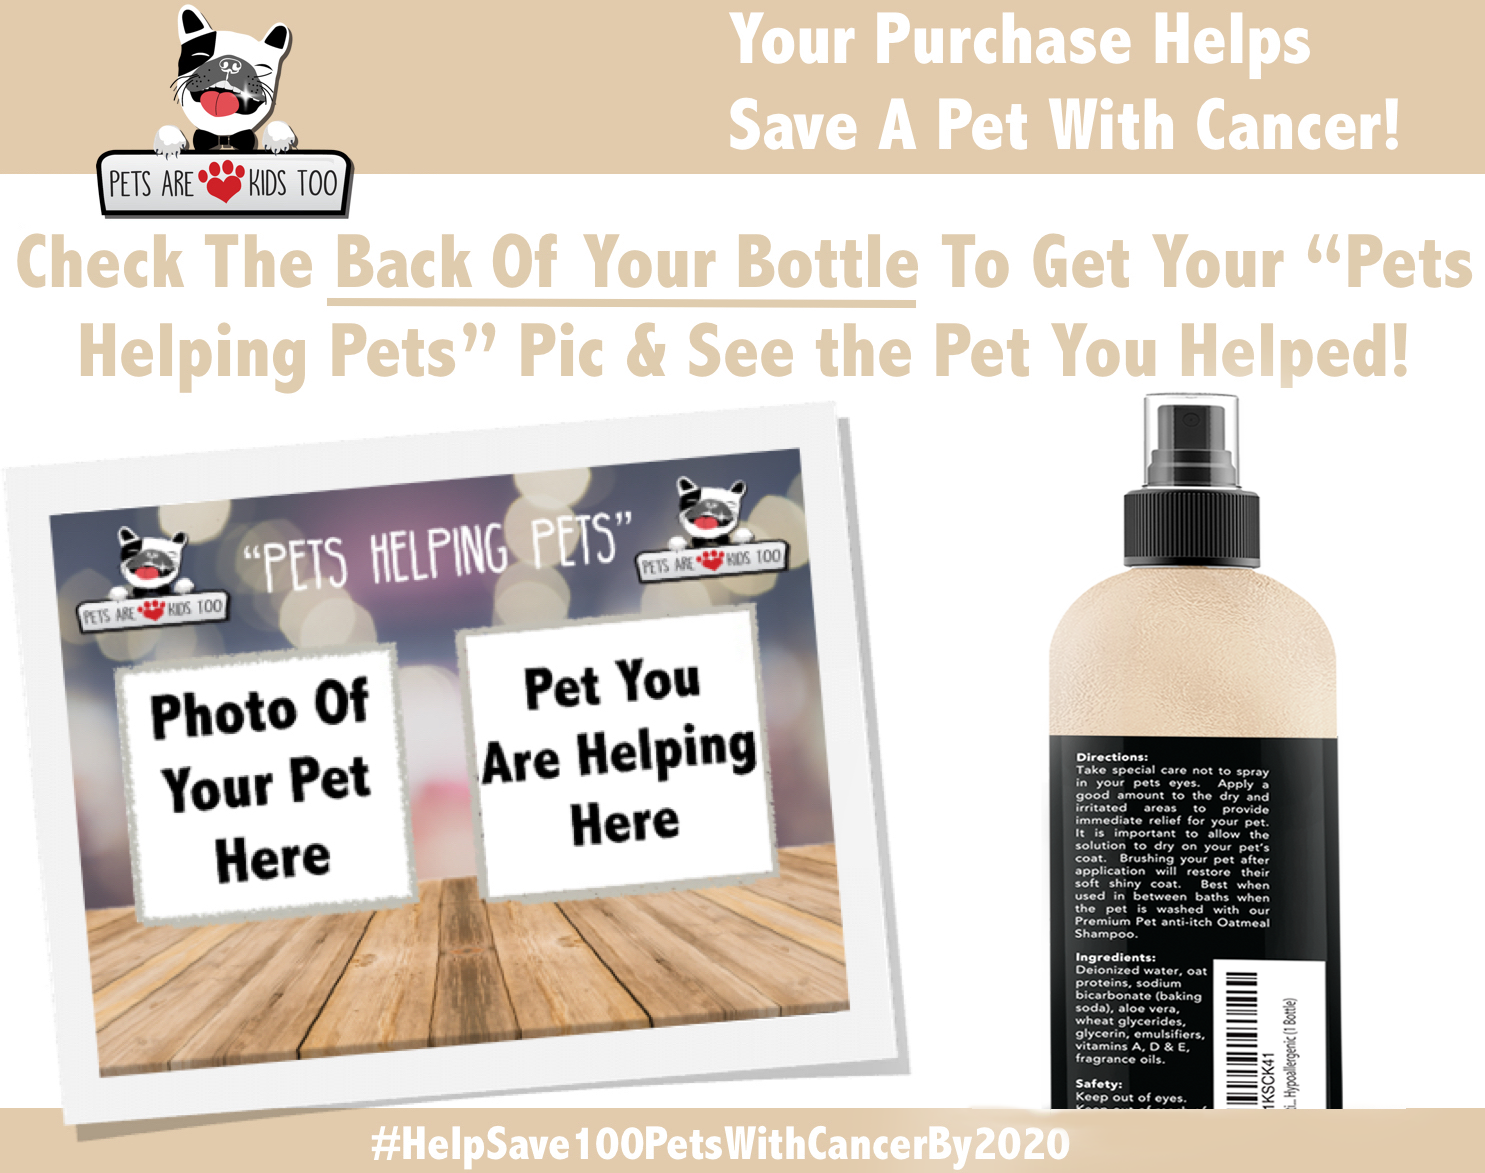 Your purchase helps save a pet with cancer